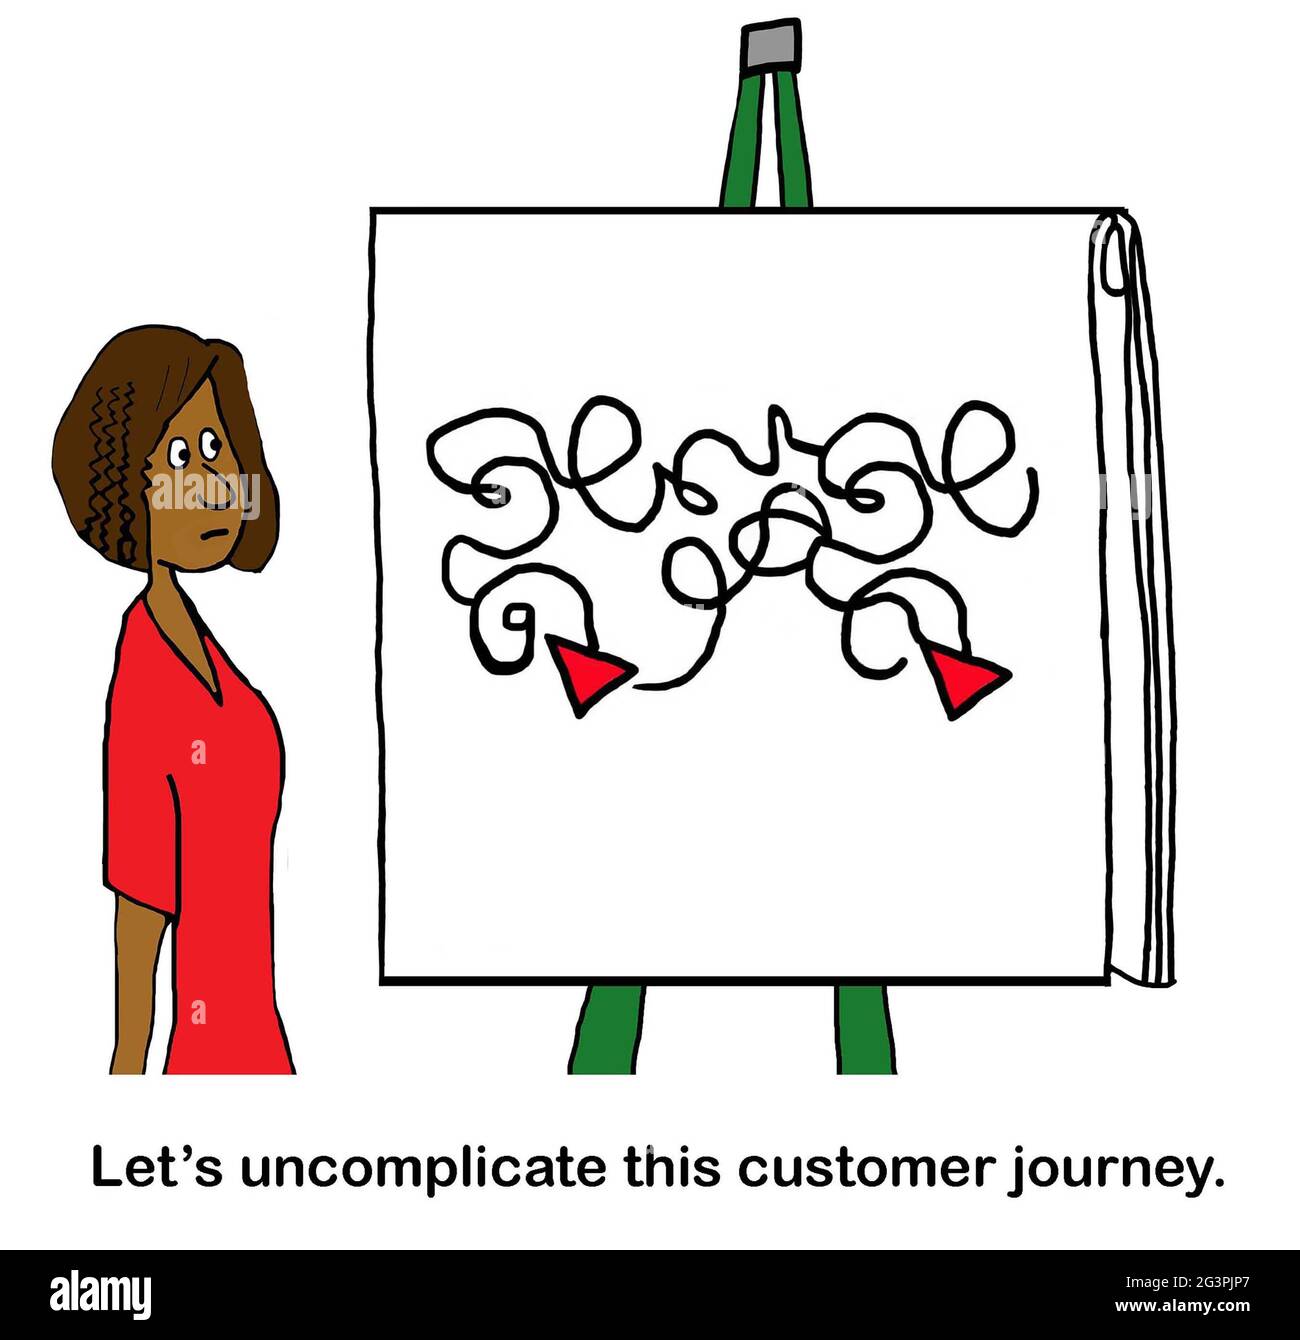 A red arrow goes through complicated path to represent a customer journey Stock Photo